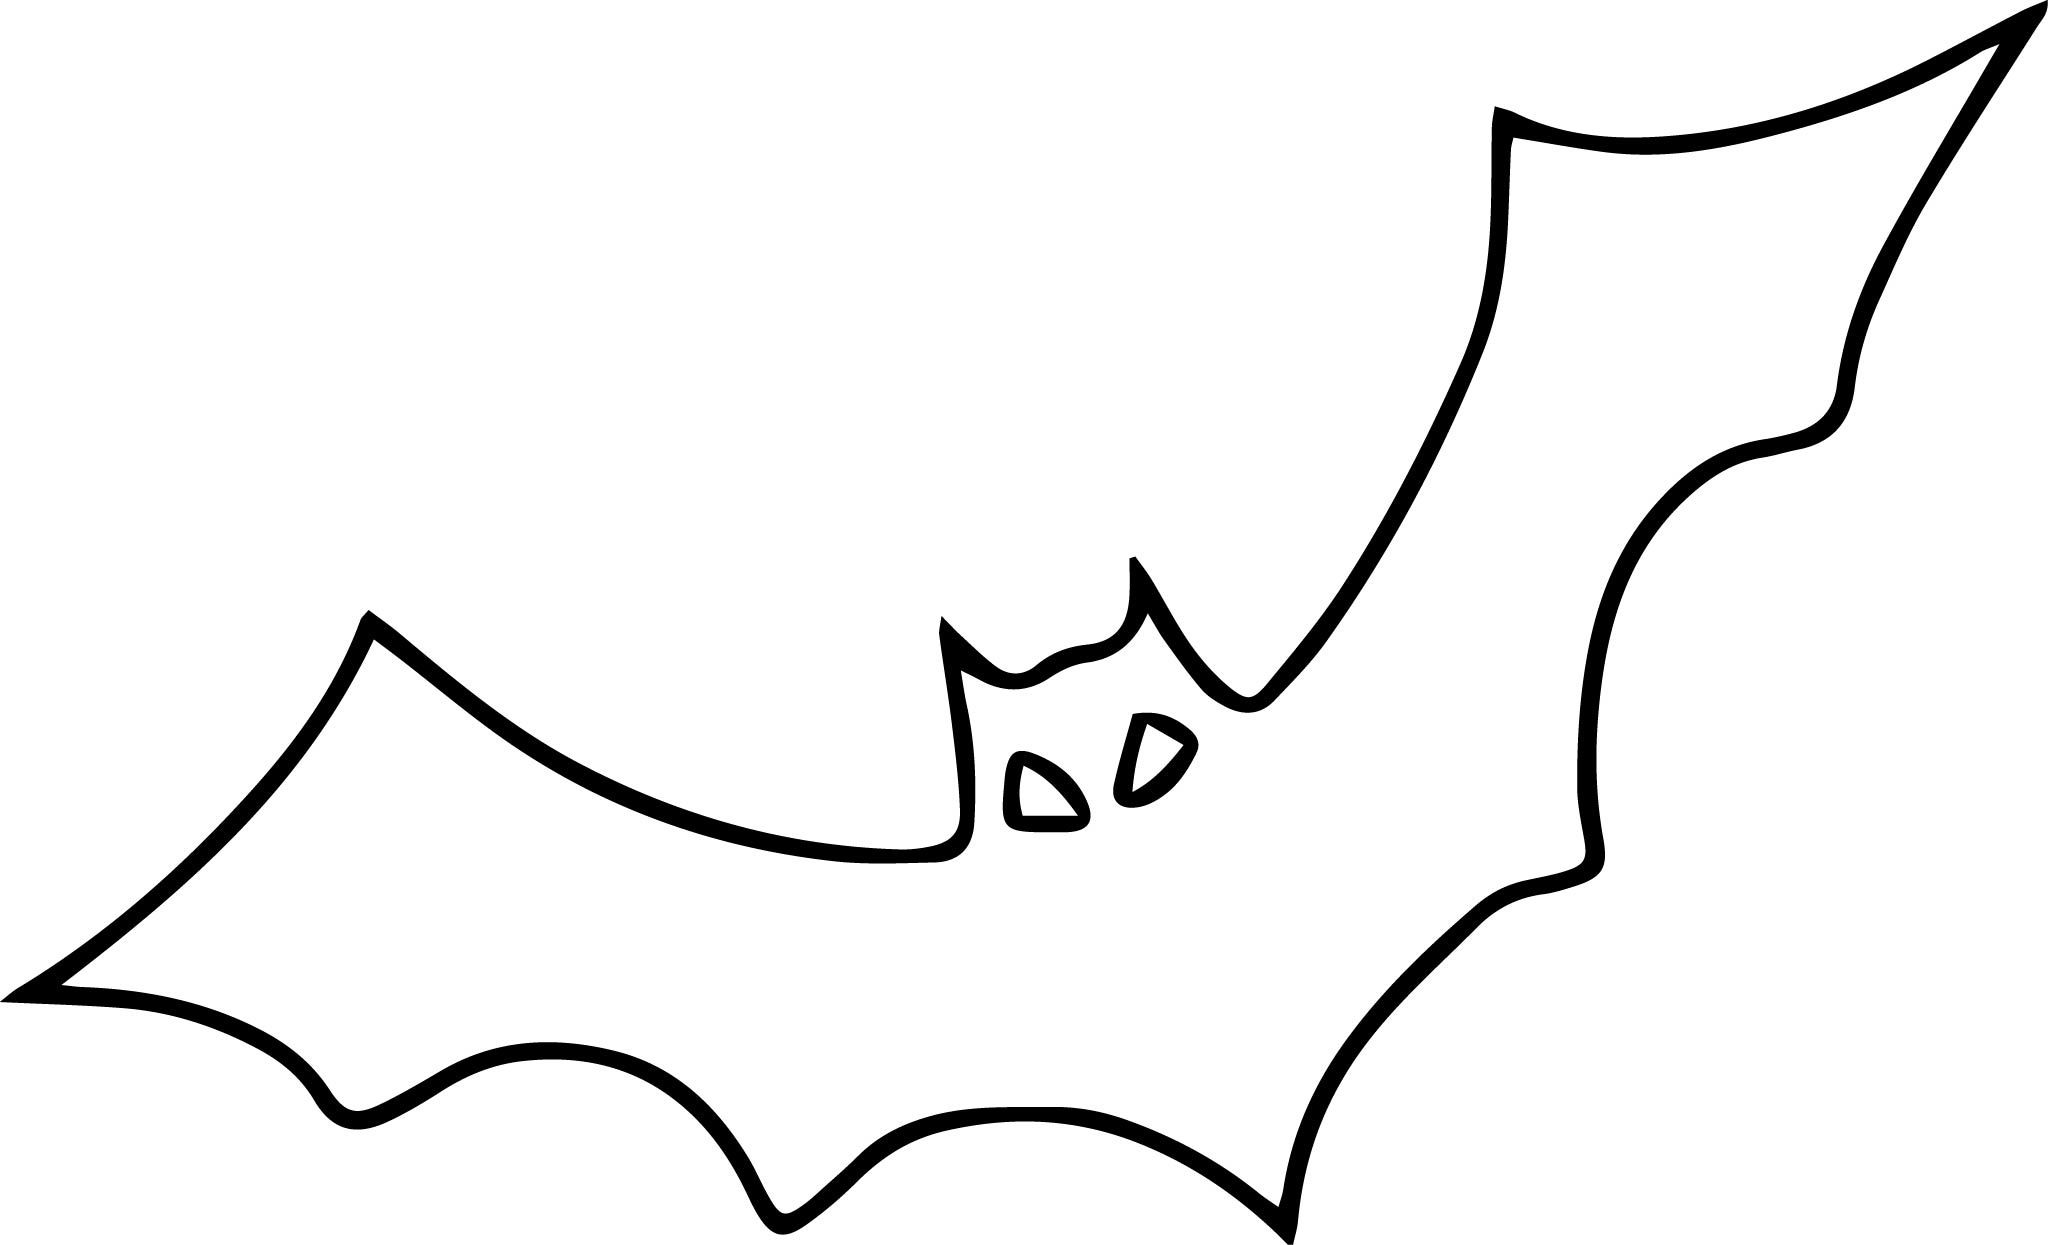 Image result for bat colouring page bat coloring pages bat outline halloween coloring